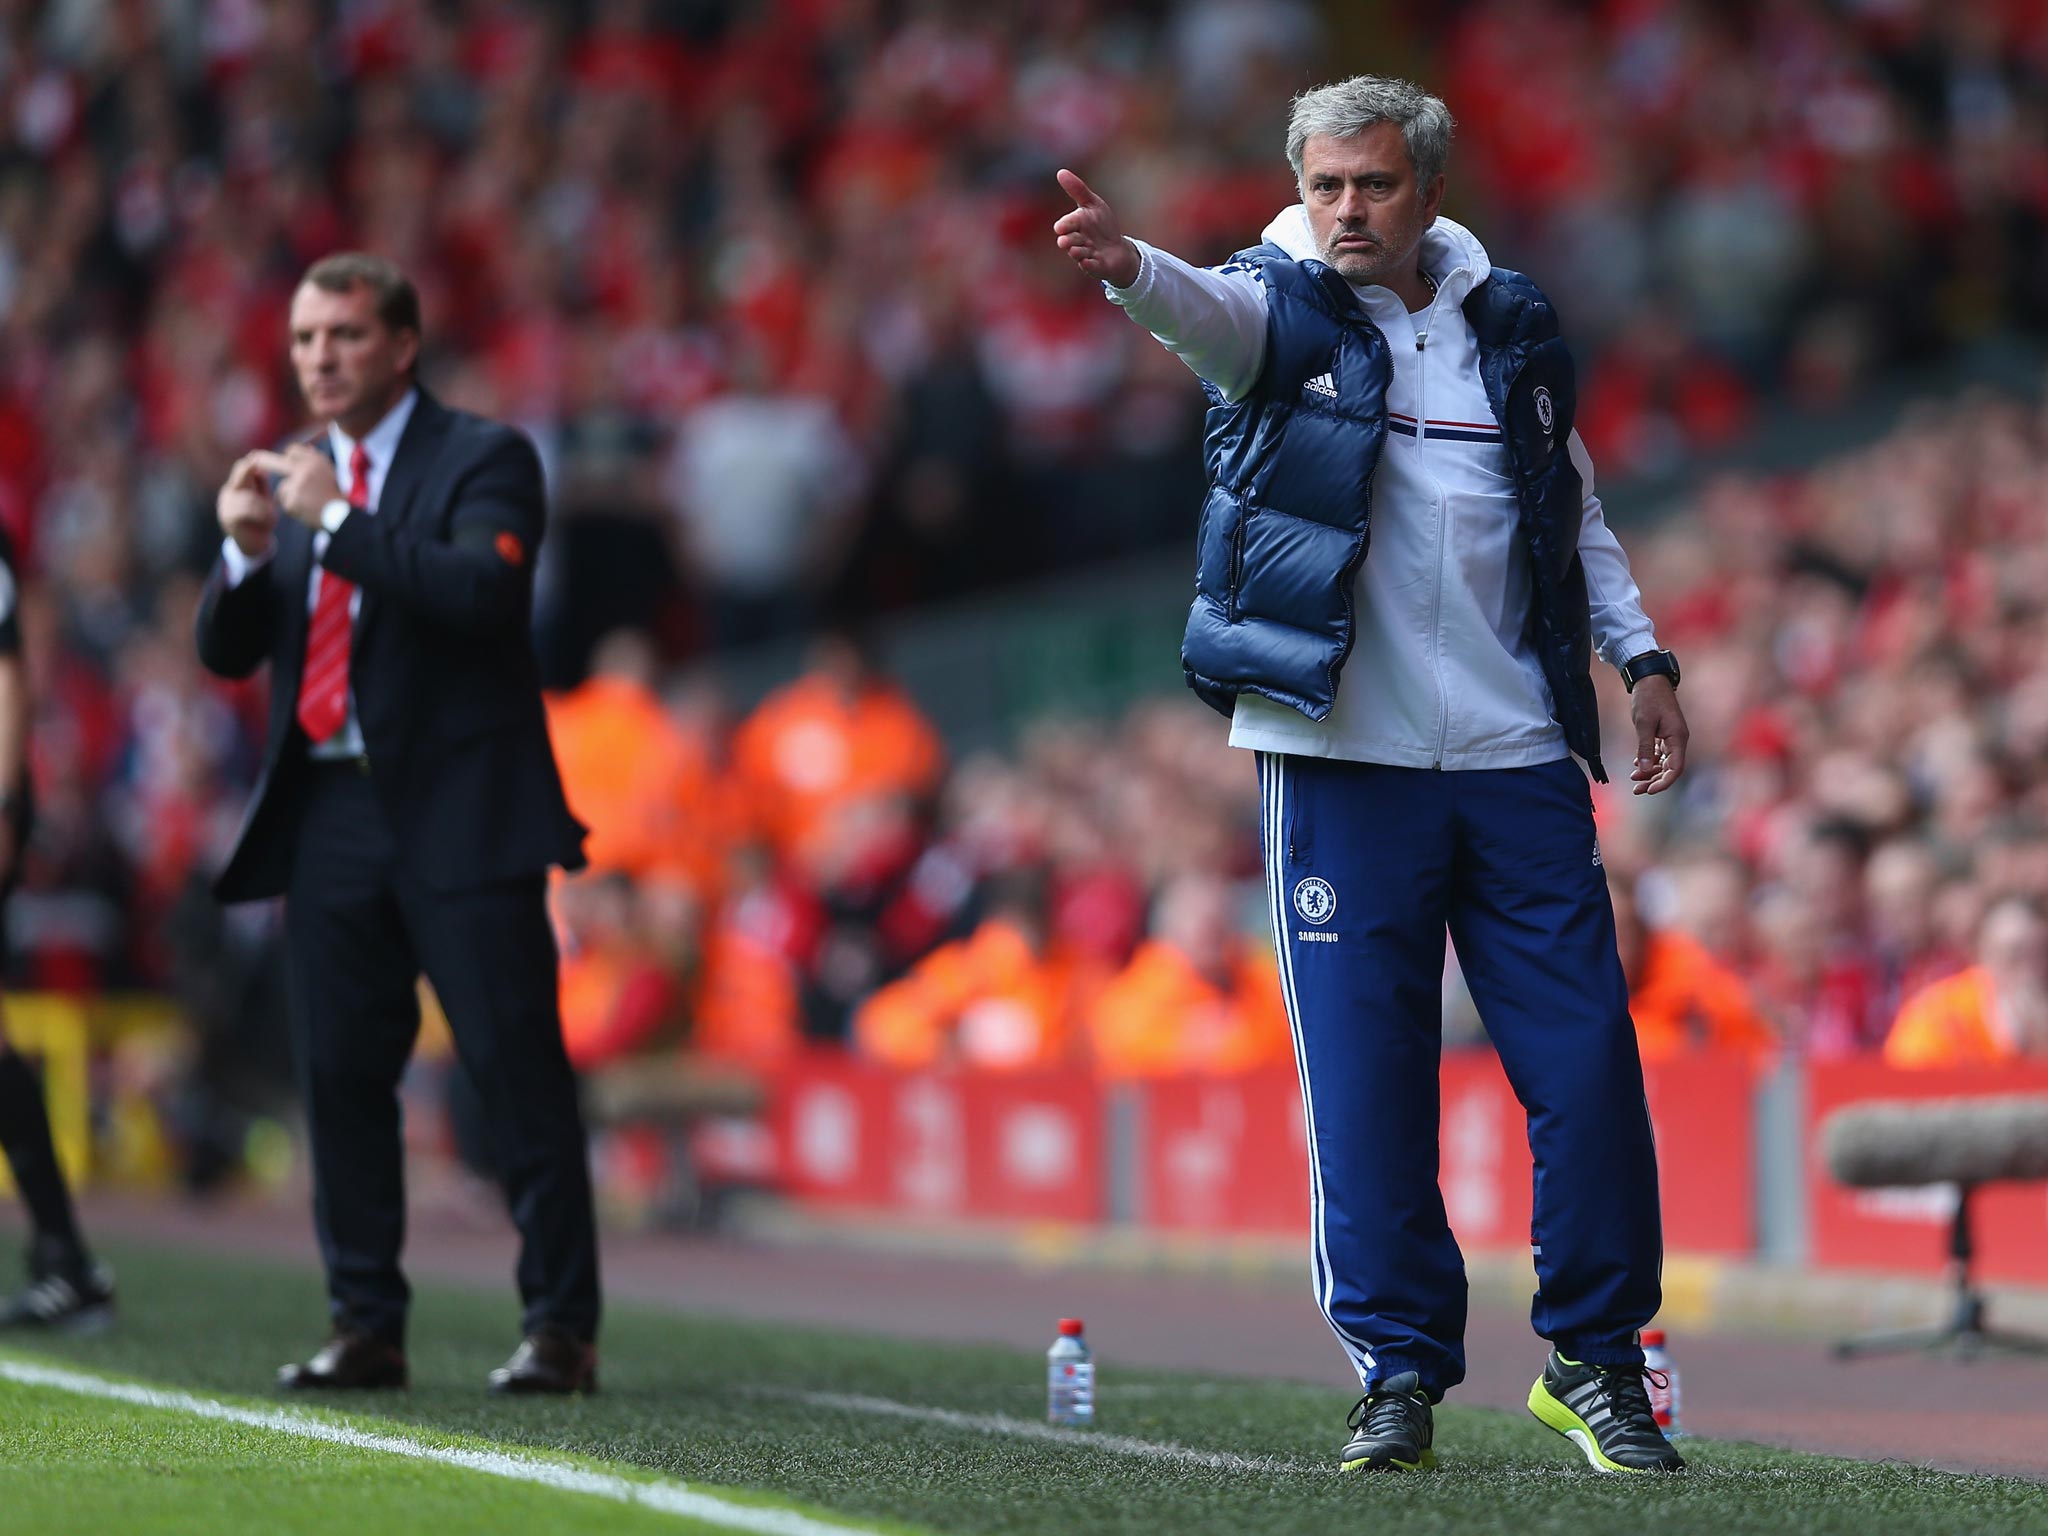 Jose Mourinho remonstrates from the sidelines during Chelsea's 2-0 victory over Liverpool